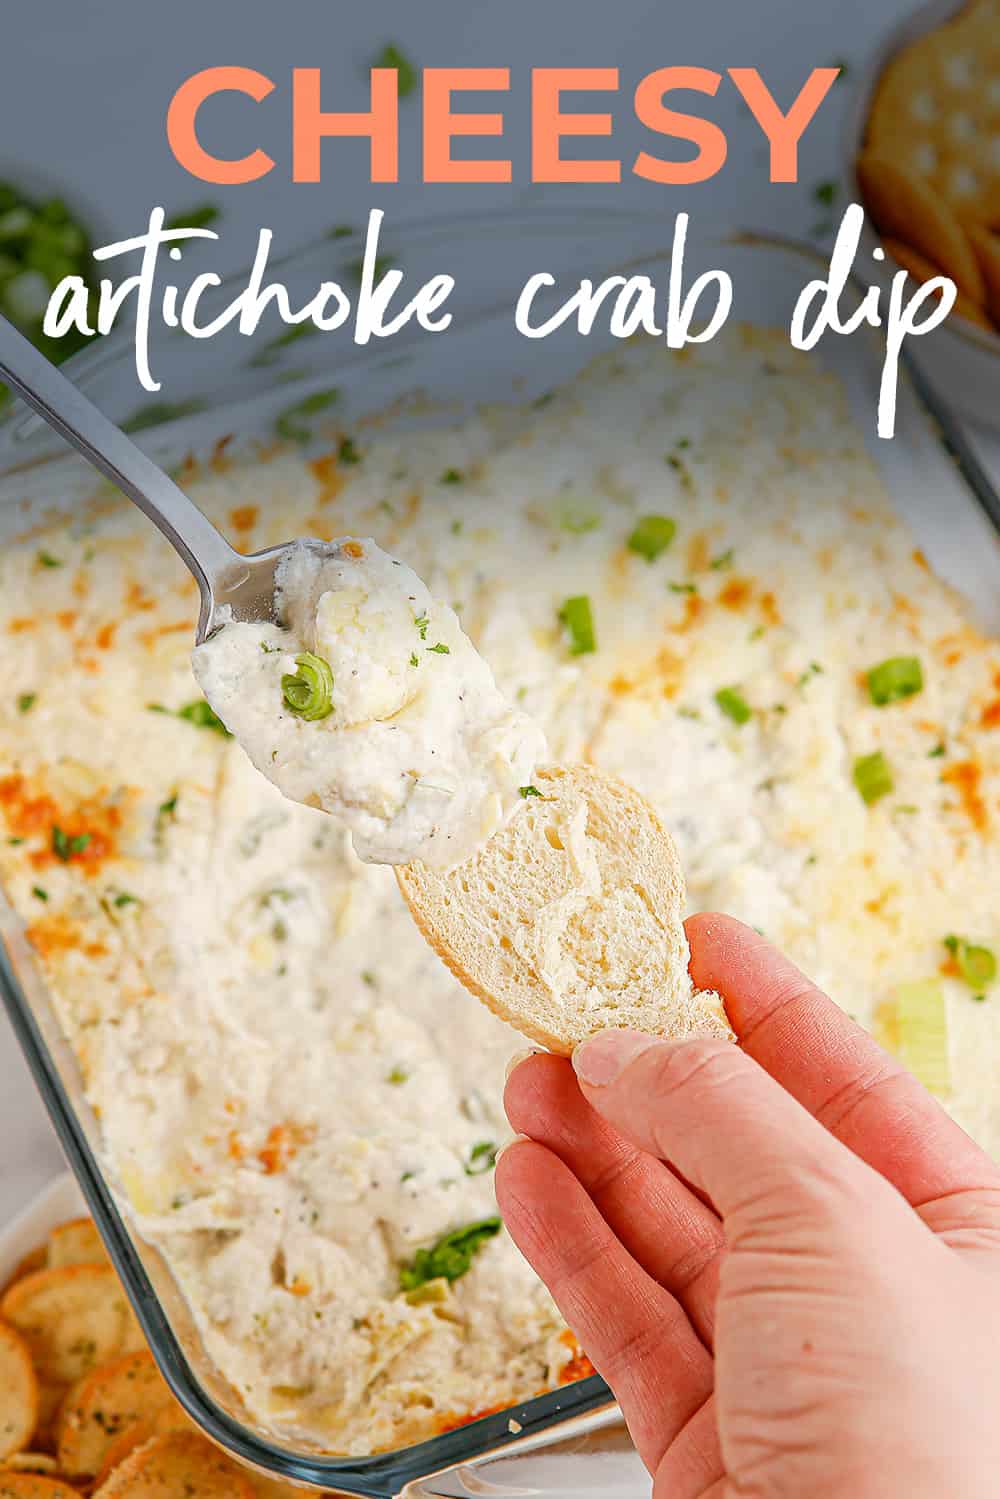 Artichoke dip with crab being spooned onto bread.